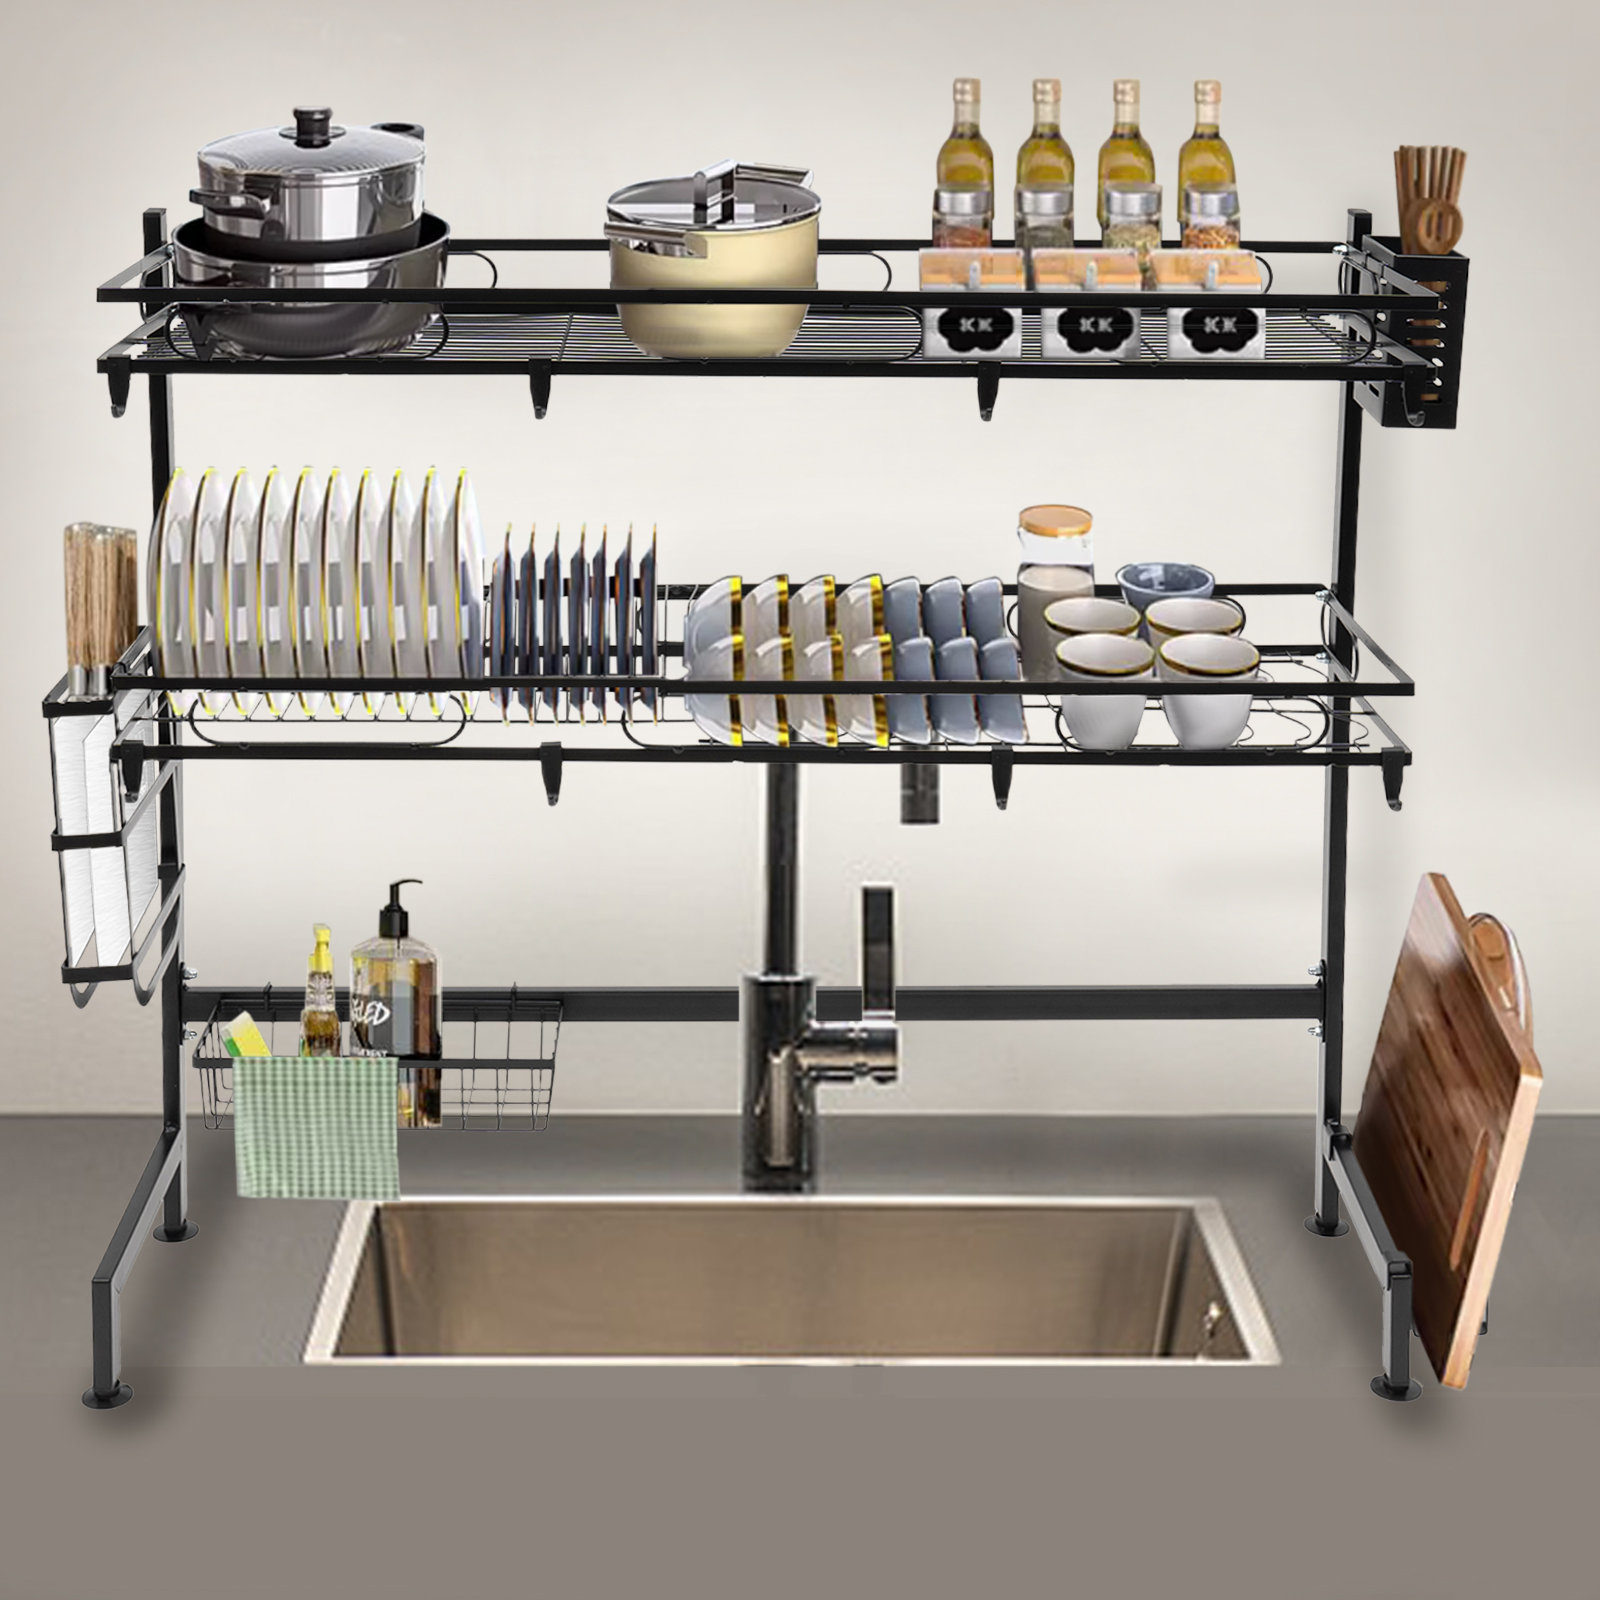 Captive Gala Carbon Steel over the Sink Dish Rack & Reviews